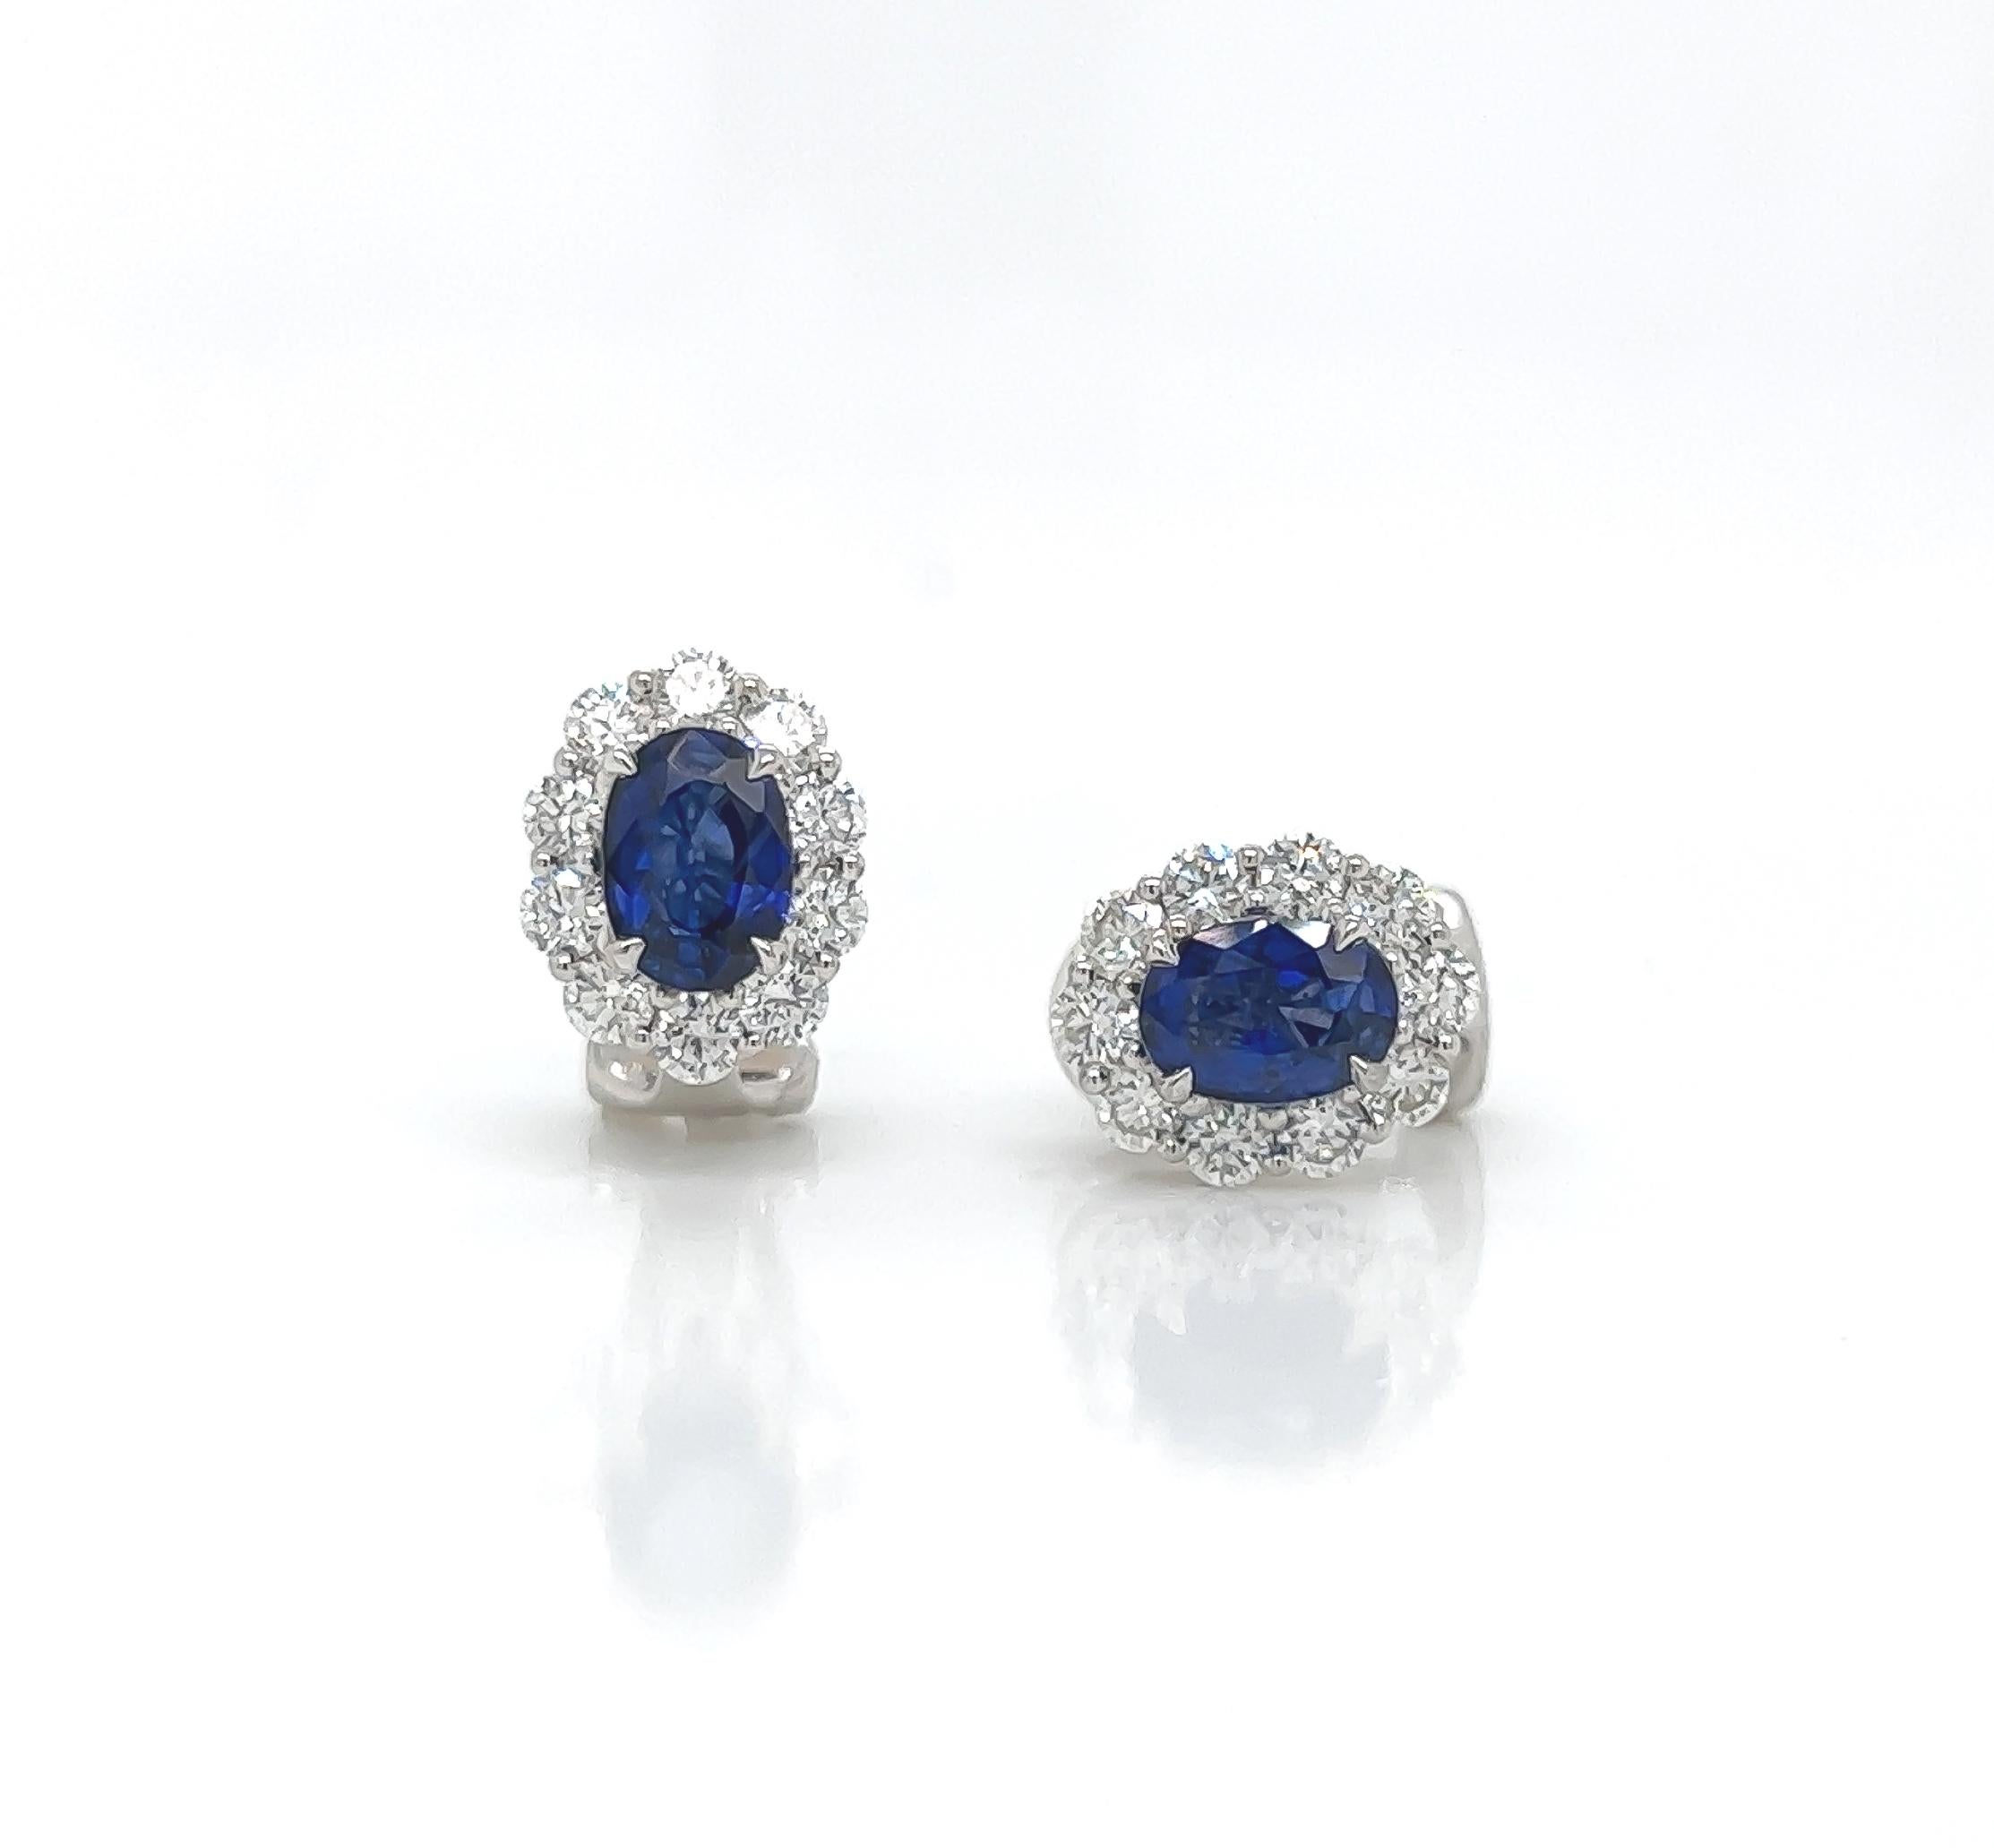 3.45 Total Carat Sapphire and Diamond Earrings in 18K White Gold

This gorgeous pair of sapphire earrings are sure to draw all eyes on you. It is created with a single 2.15 Carat Oval Sapphire, surrounded by a halo of round cut diamonds totaling a